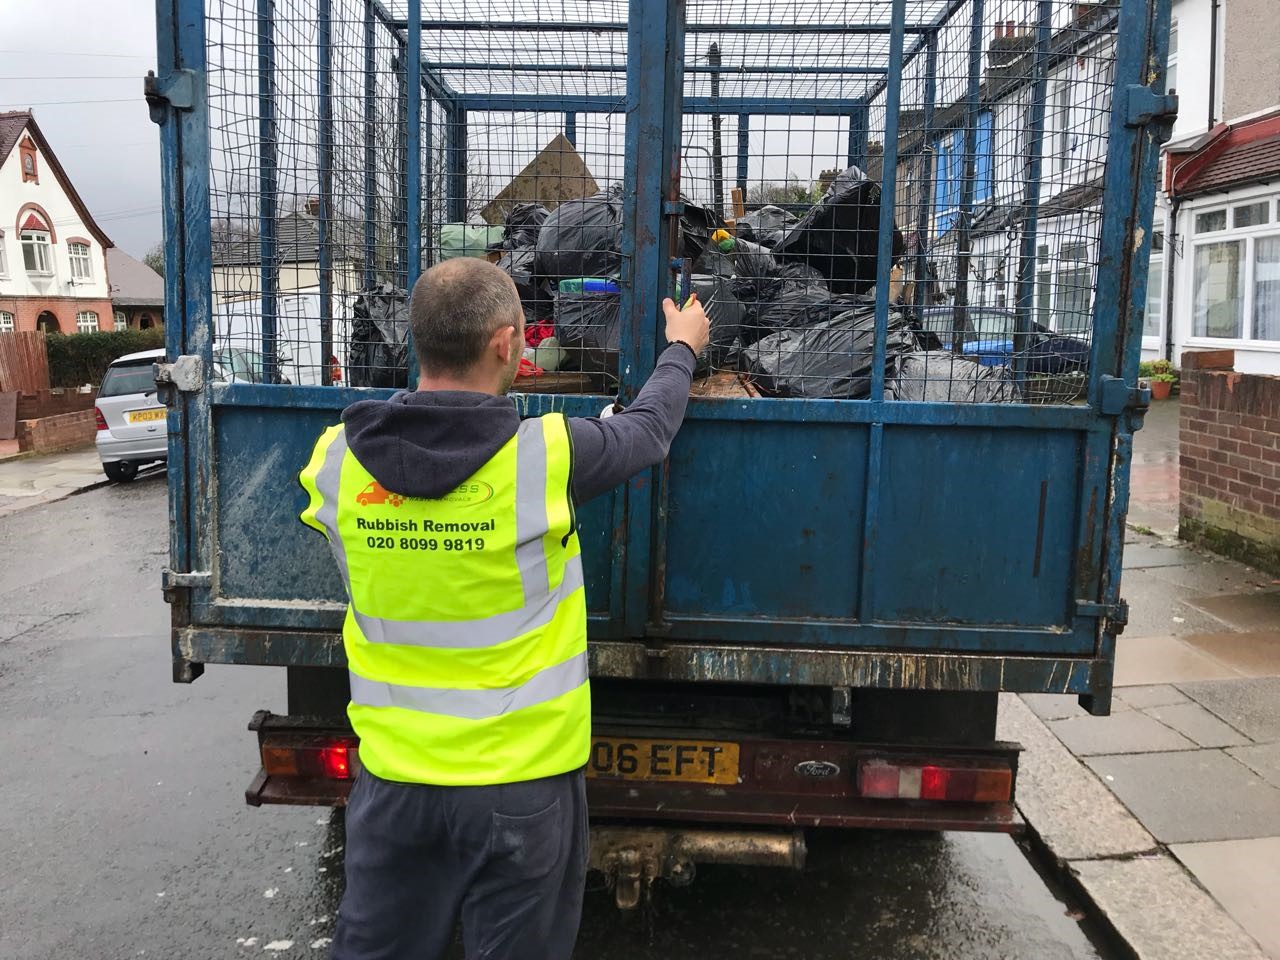 Express Waste Removals Commercial waste collection in London